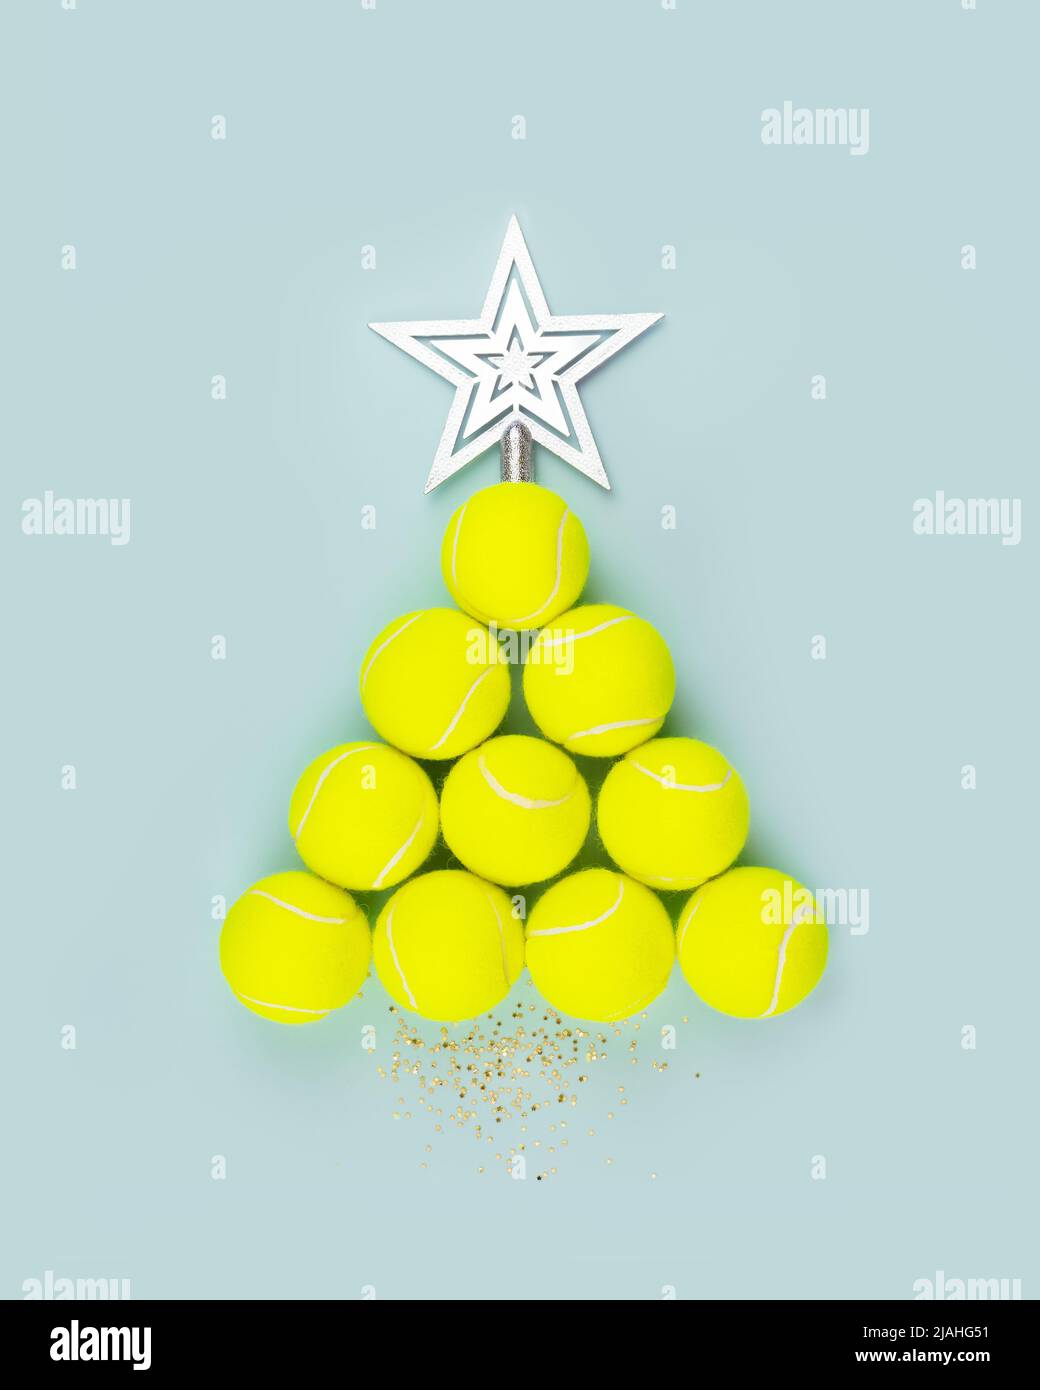 Tennis balls in the form of a New Year Tree with decorative star Stock Photo